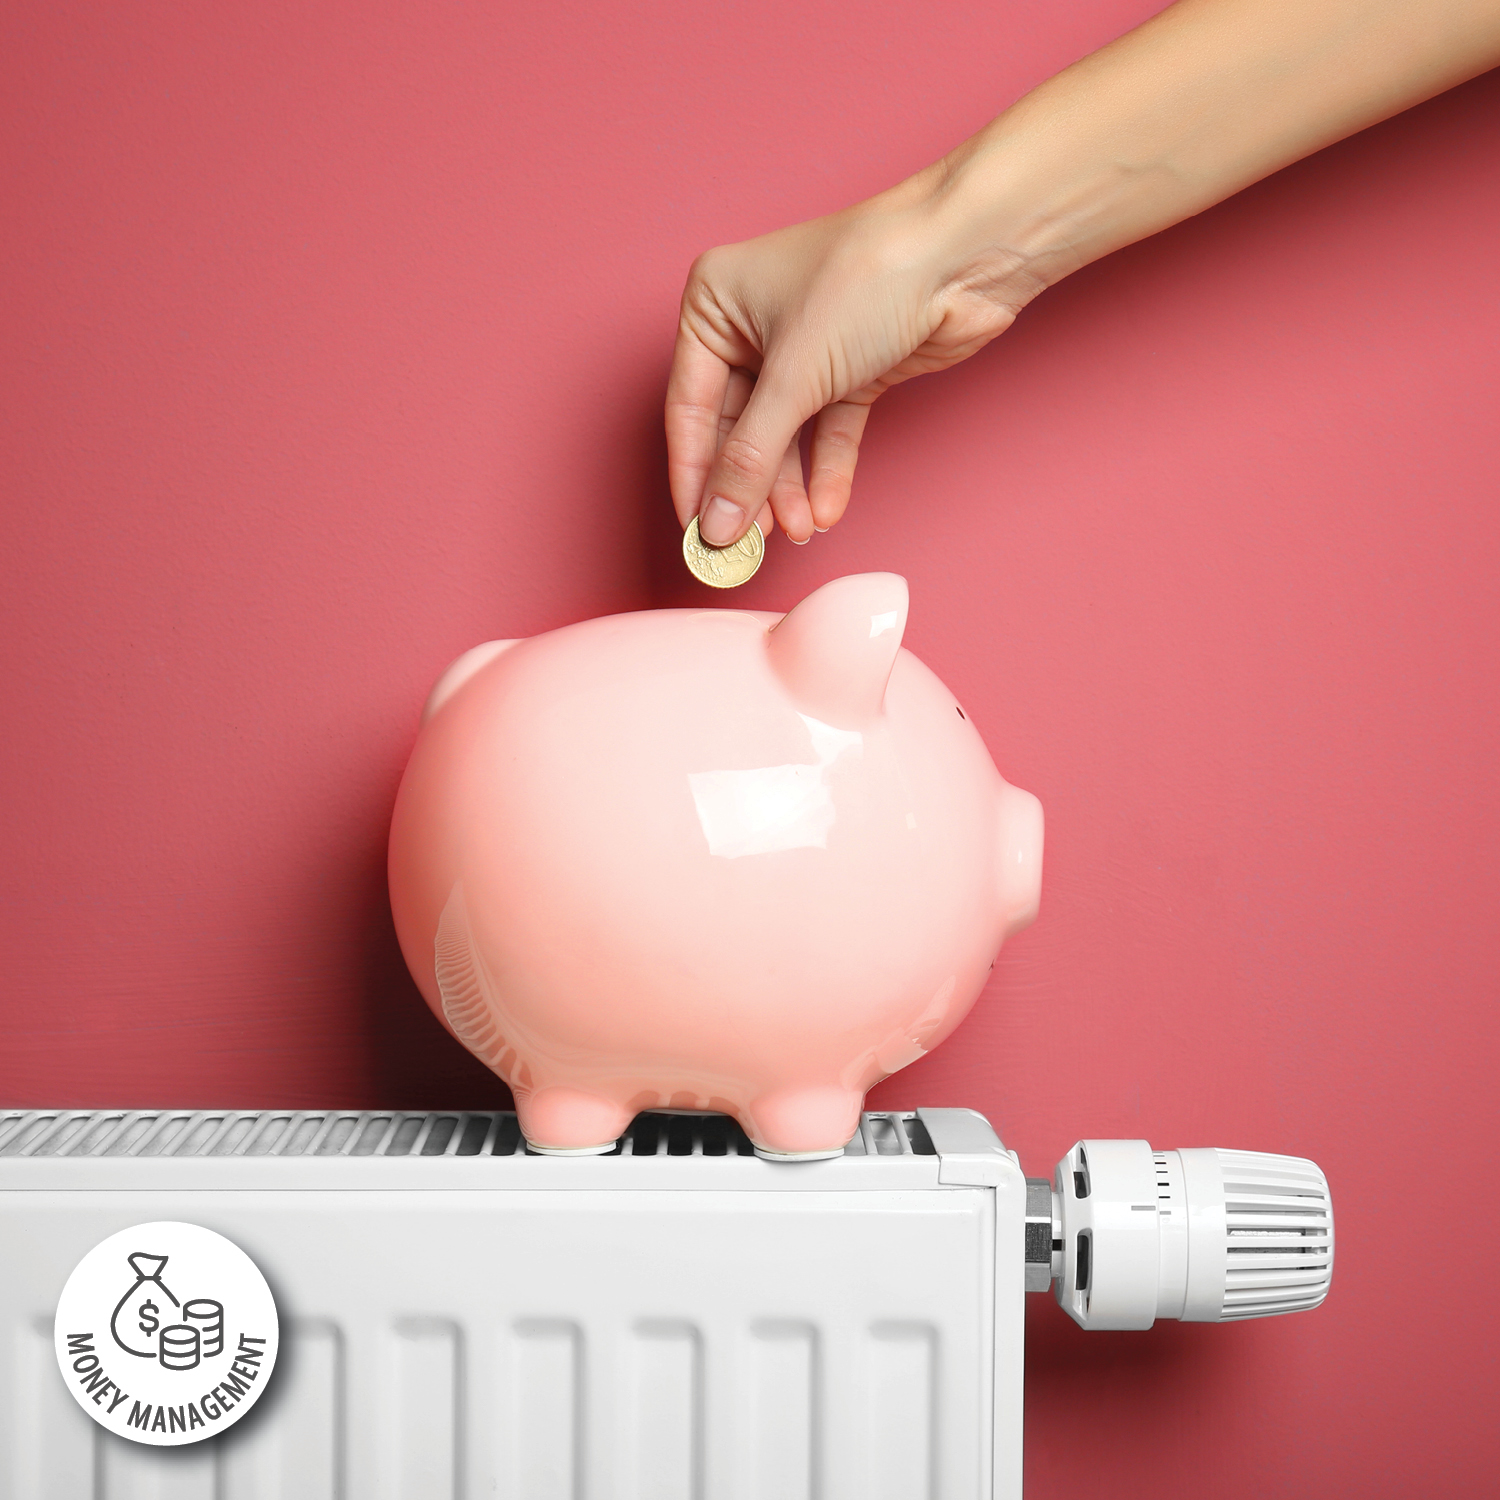 How Can I Save on Heating Costs This Winter?